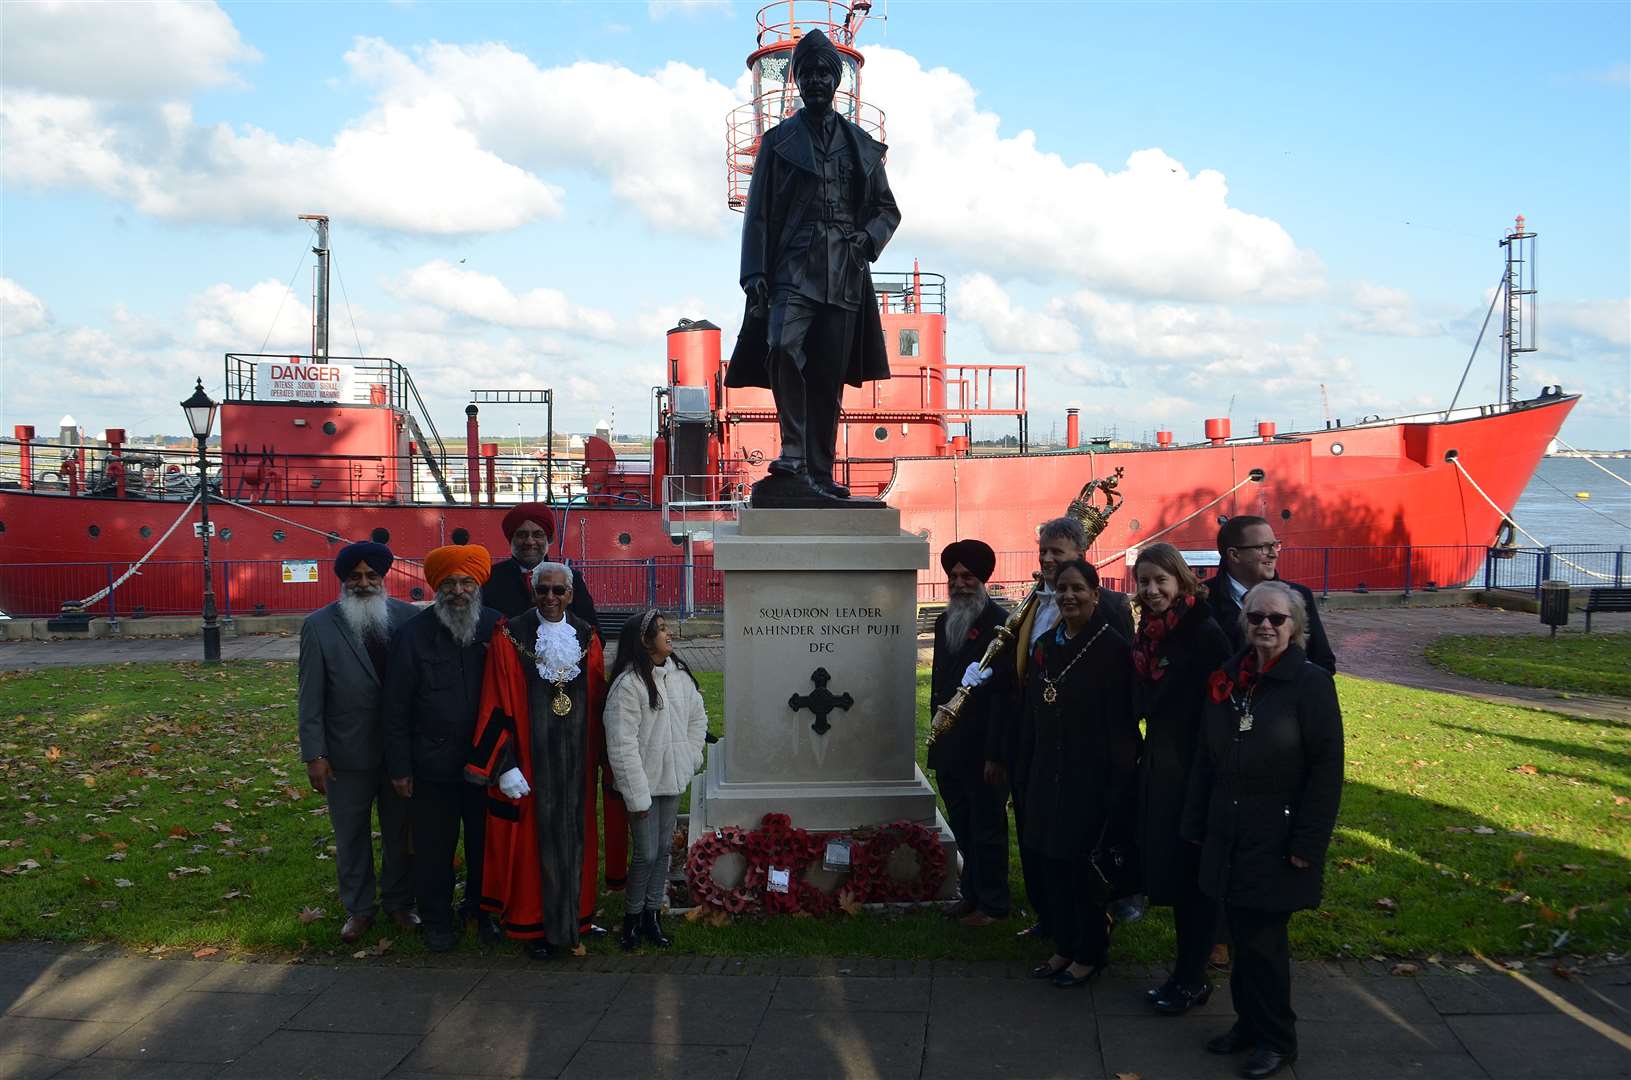 The Mayor Cllr Gurdip Ram Bungar is joined by members of the Sikh community to commemorate late RAF Squadron Leader Mohinder Singh Pujji at his monument. Picture: Jason Arthur (21349609)